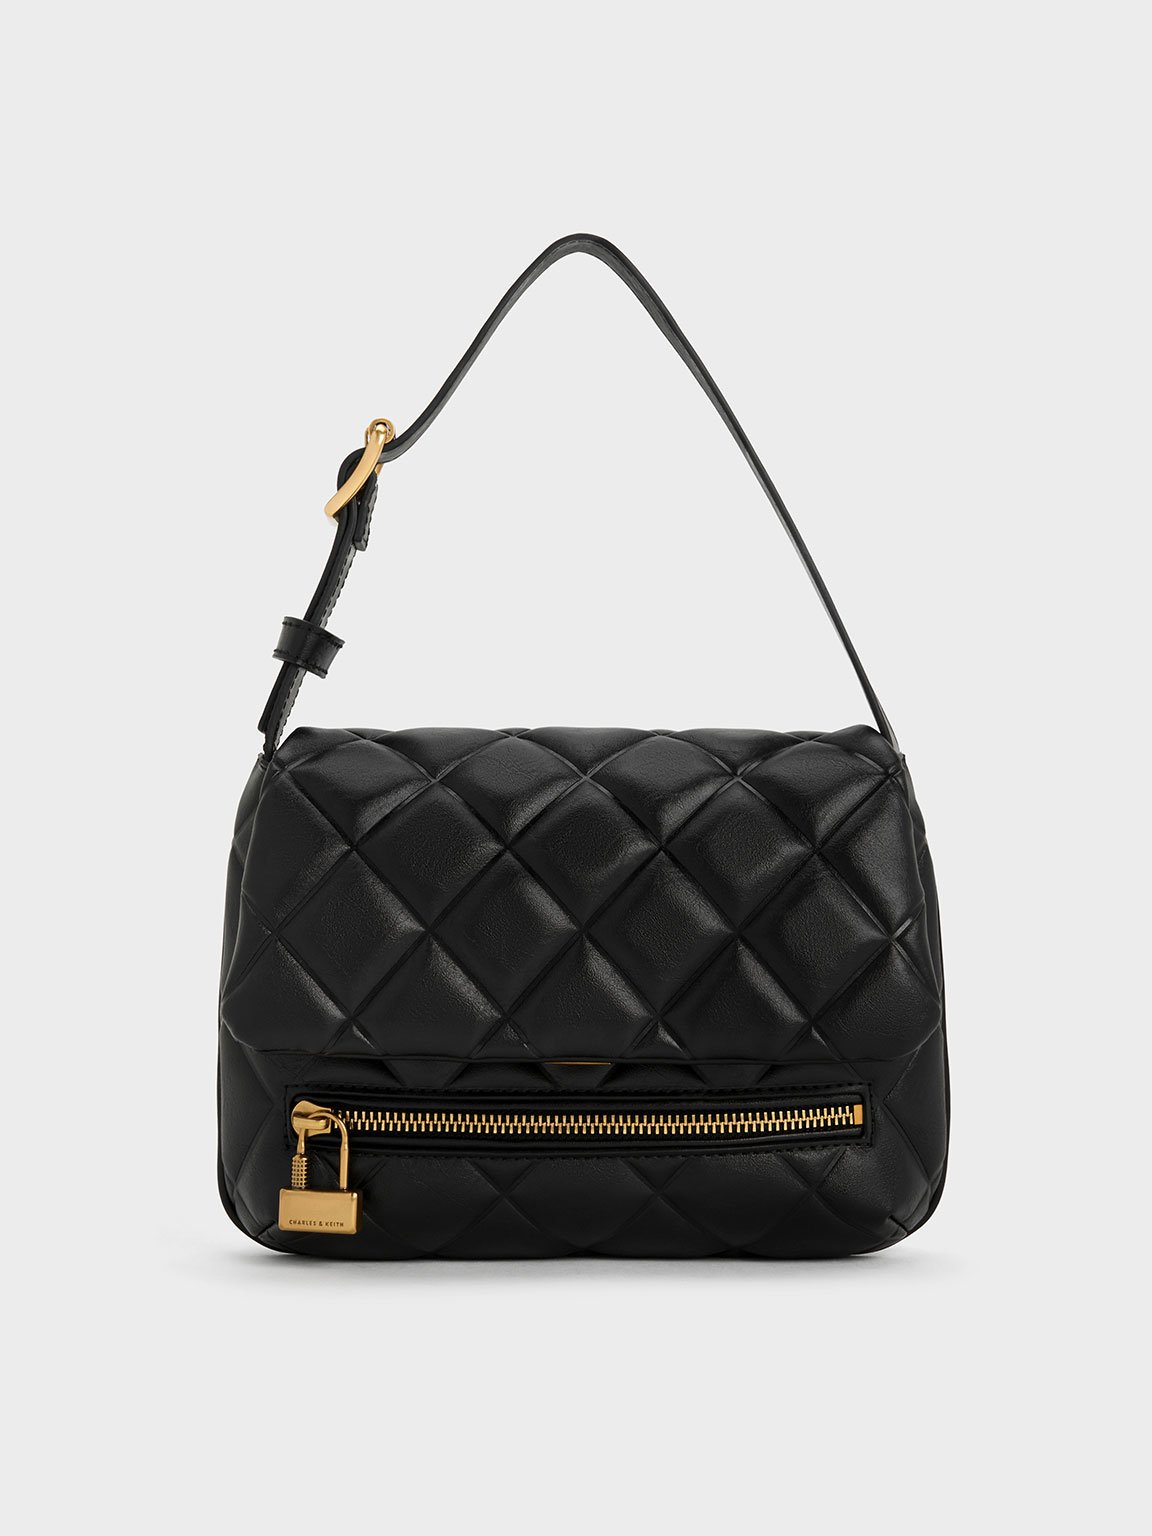 Small Leather Crossbody Purse for Women Black Quilted Purse with